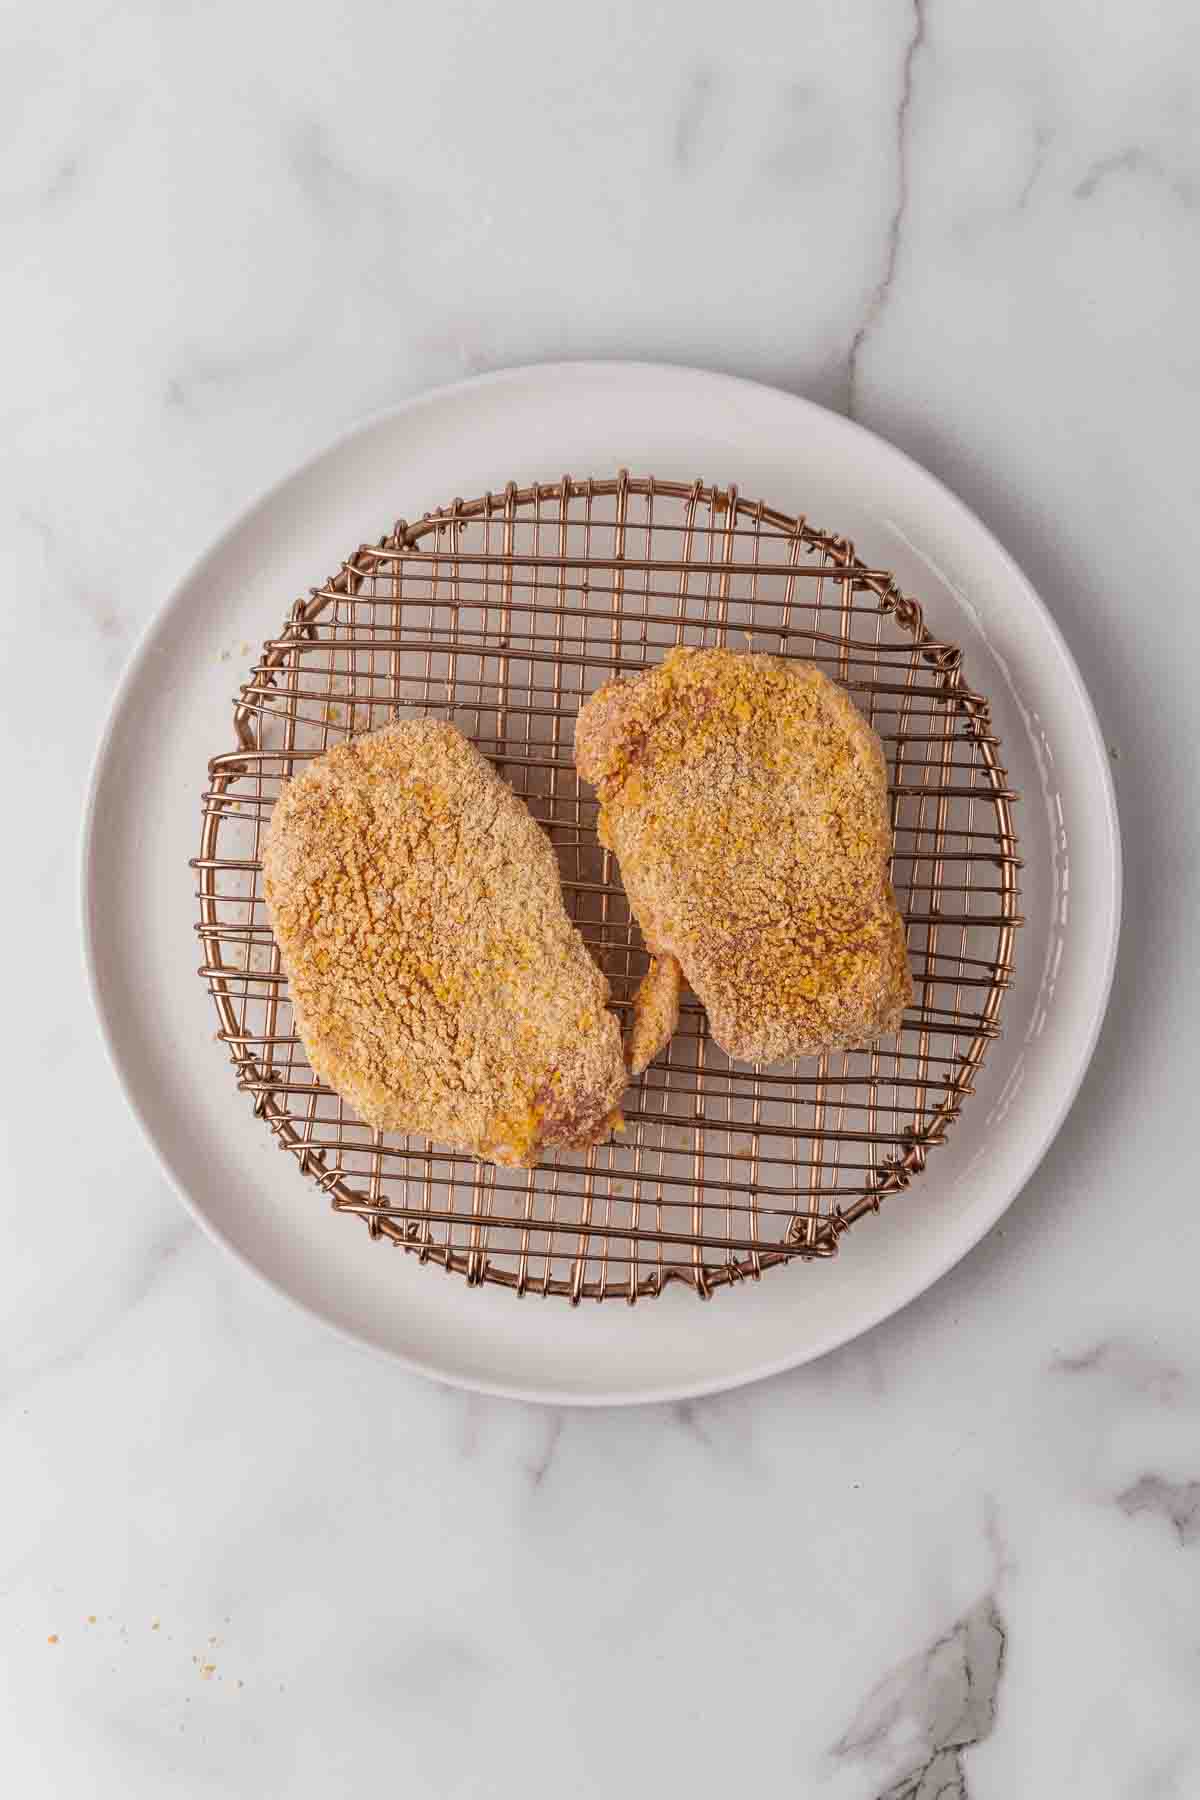 Two pieces of breaded pork chops on a plate.